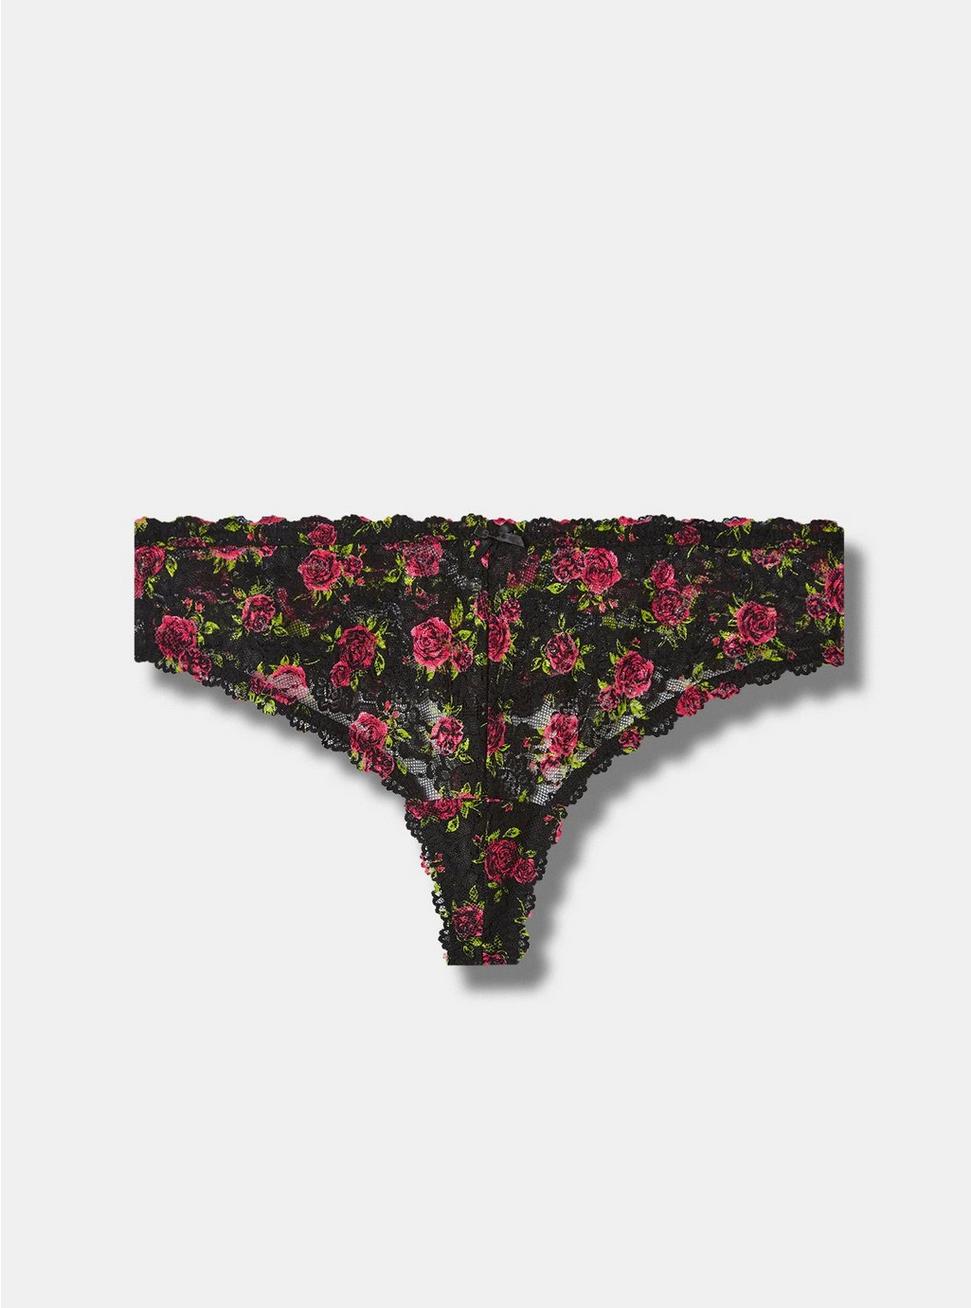 Simply Lace Mid Rise Thong Panty, BRUSHED ROSES FLORAL BLACK, hi-res